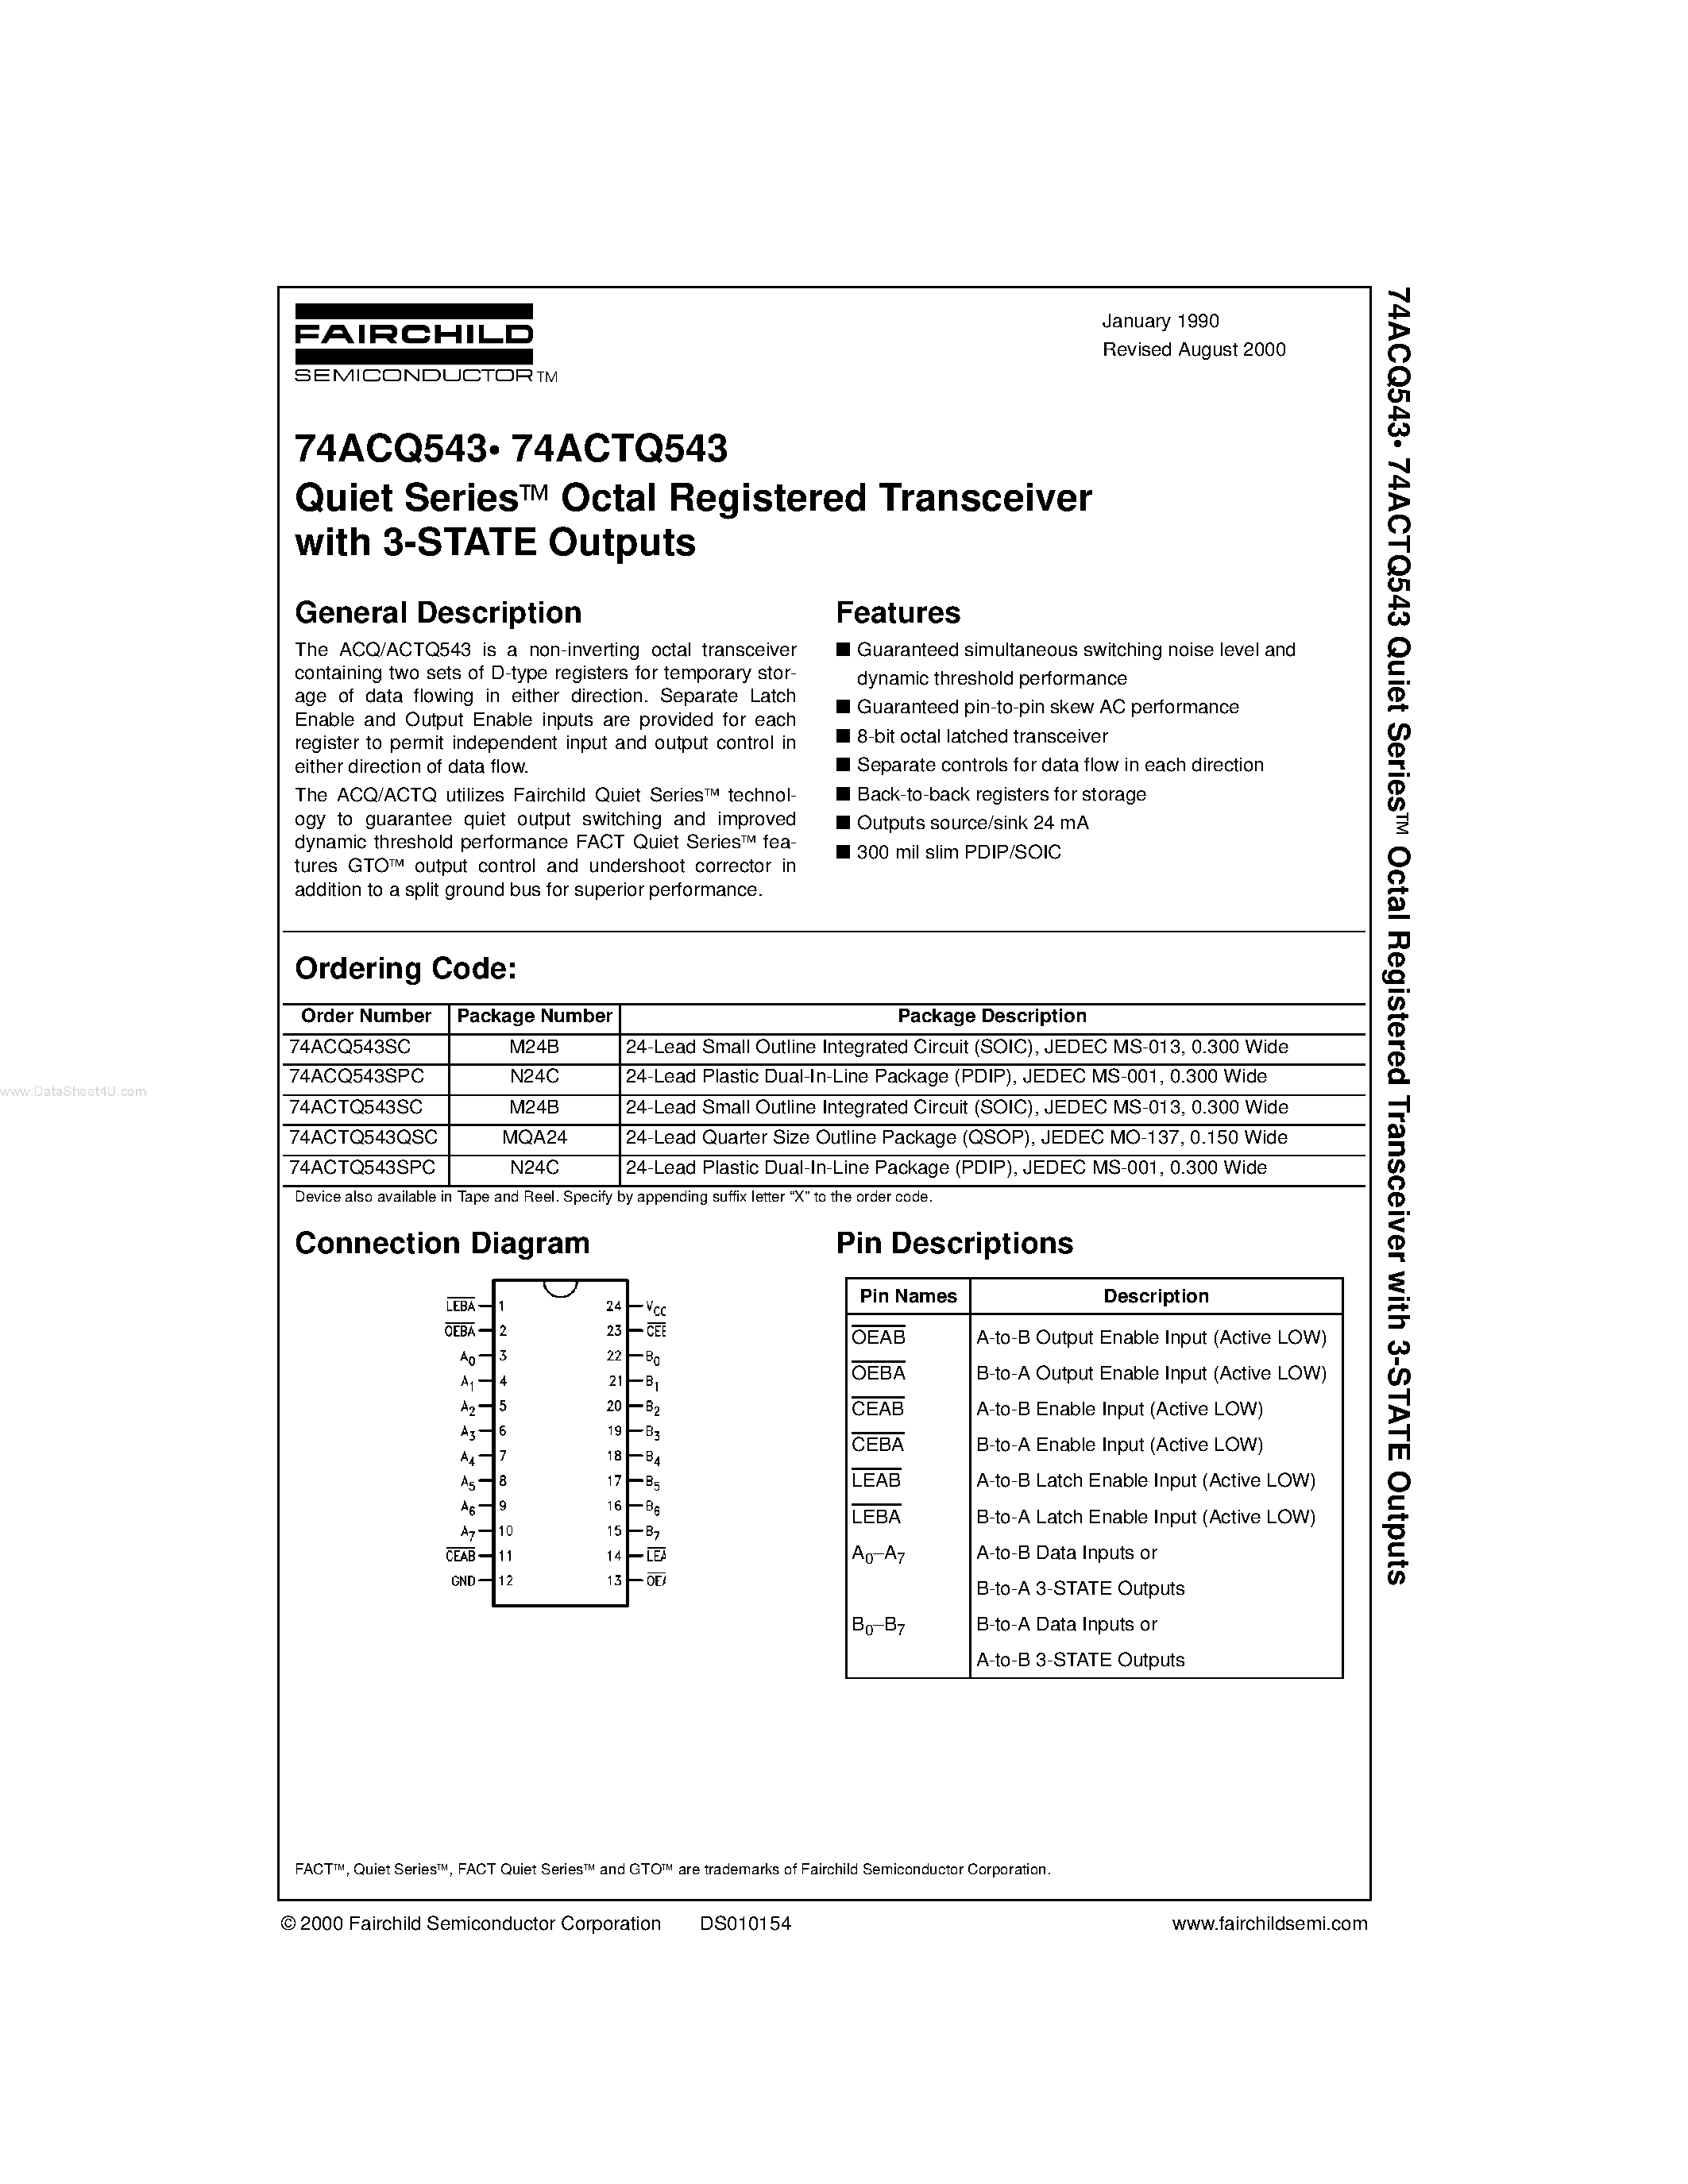 Datasheet 74ACTQ543SC - Quiet Series Octal Registered Transceiver with 3-STATE Outputs page 1